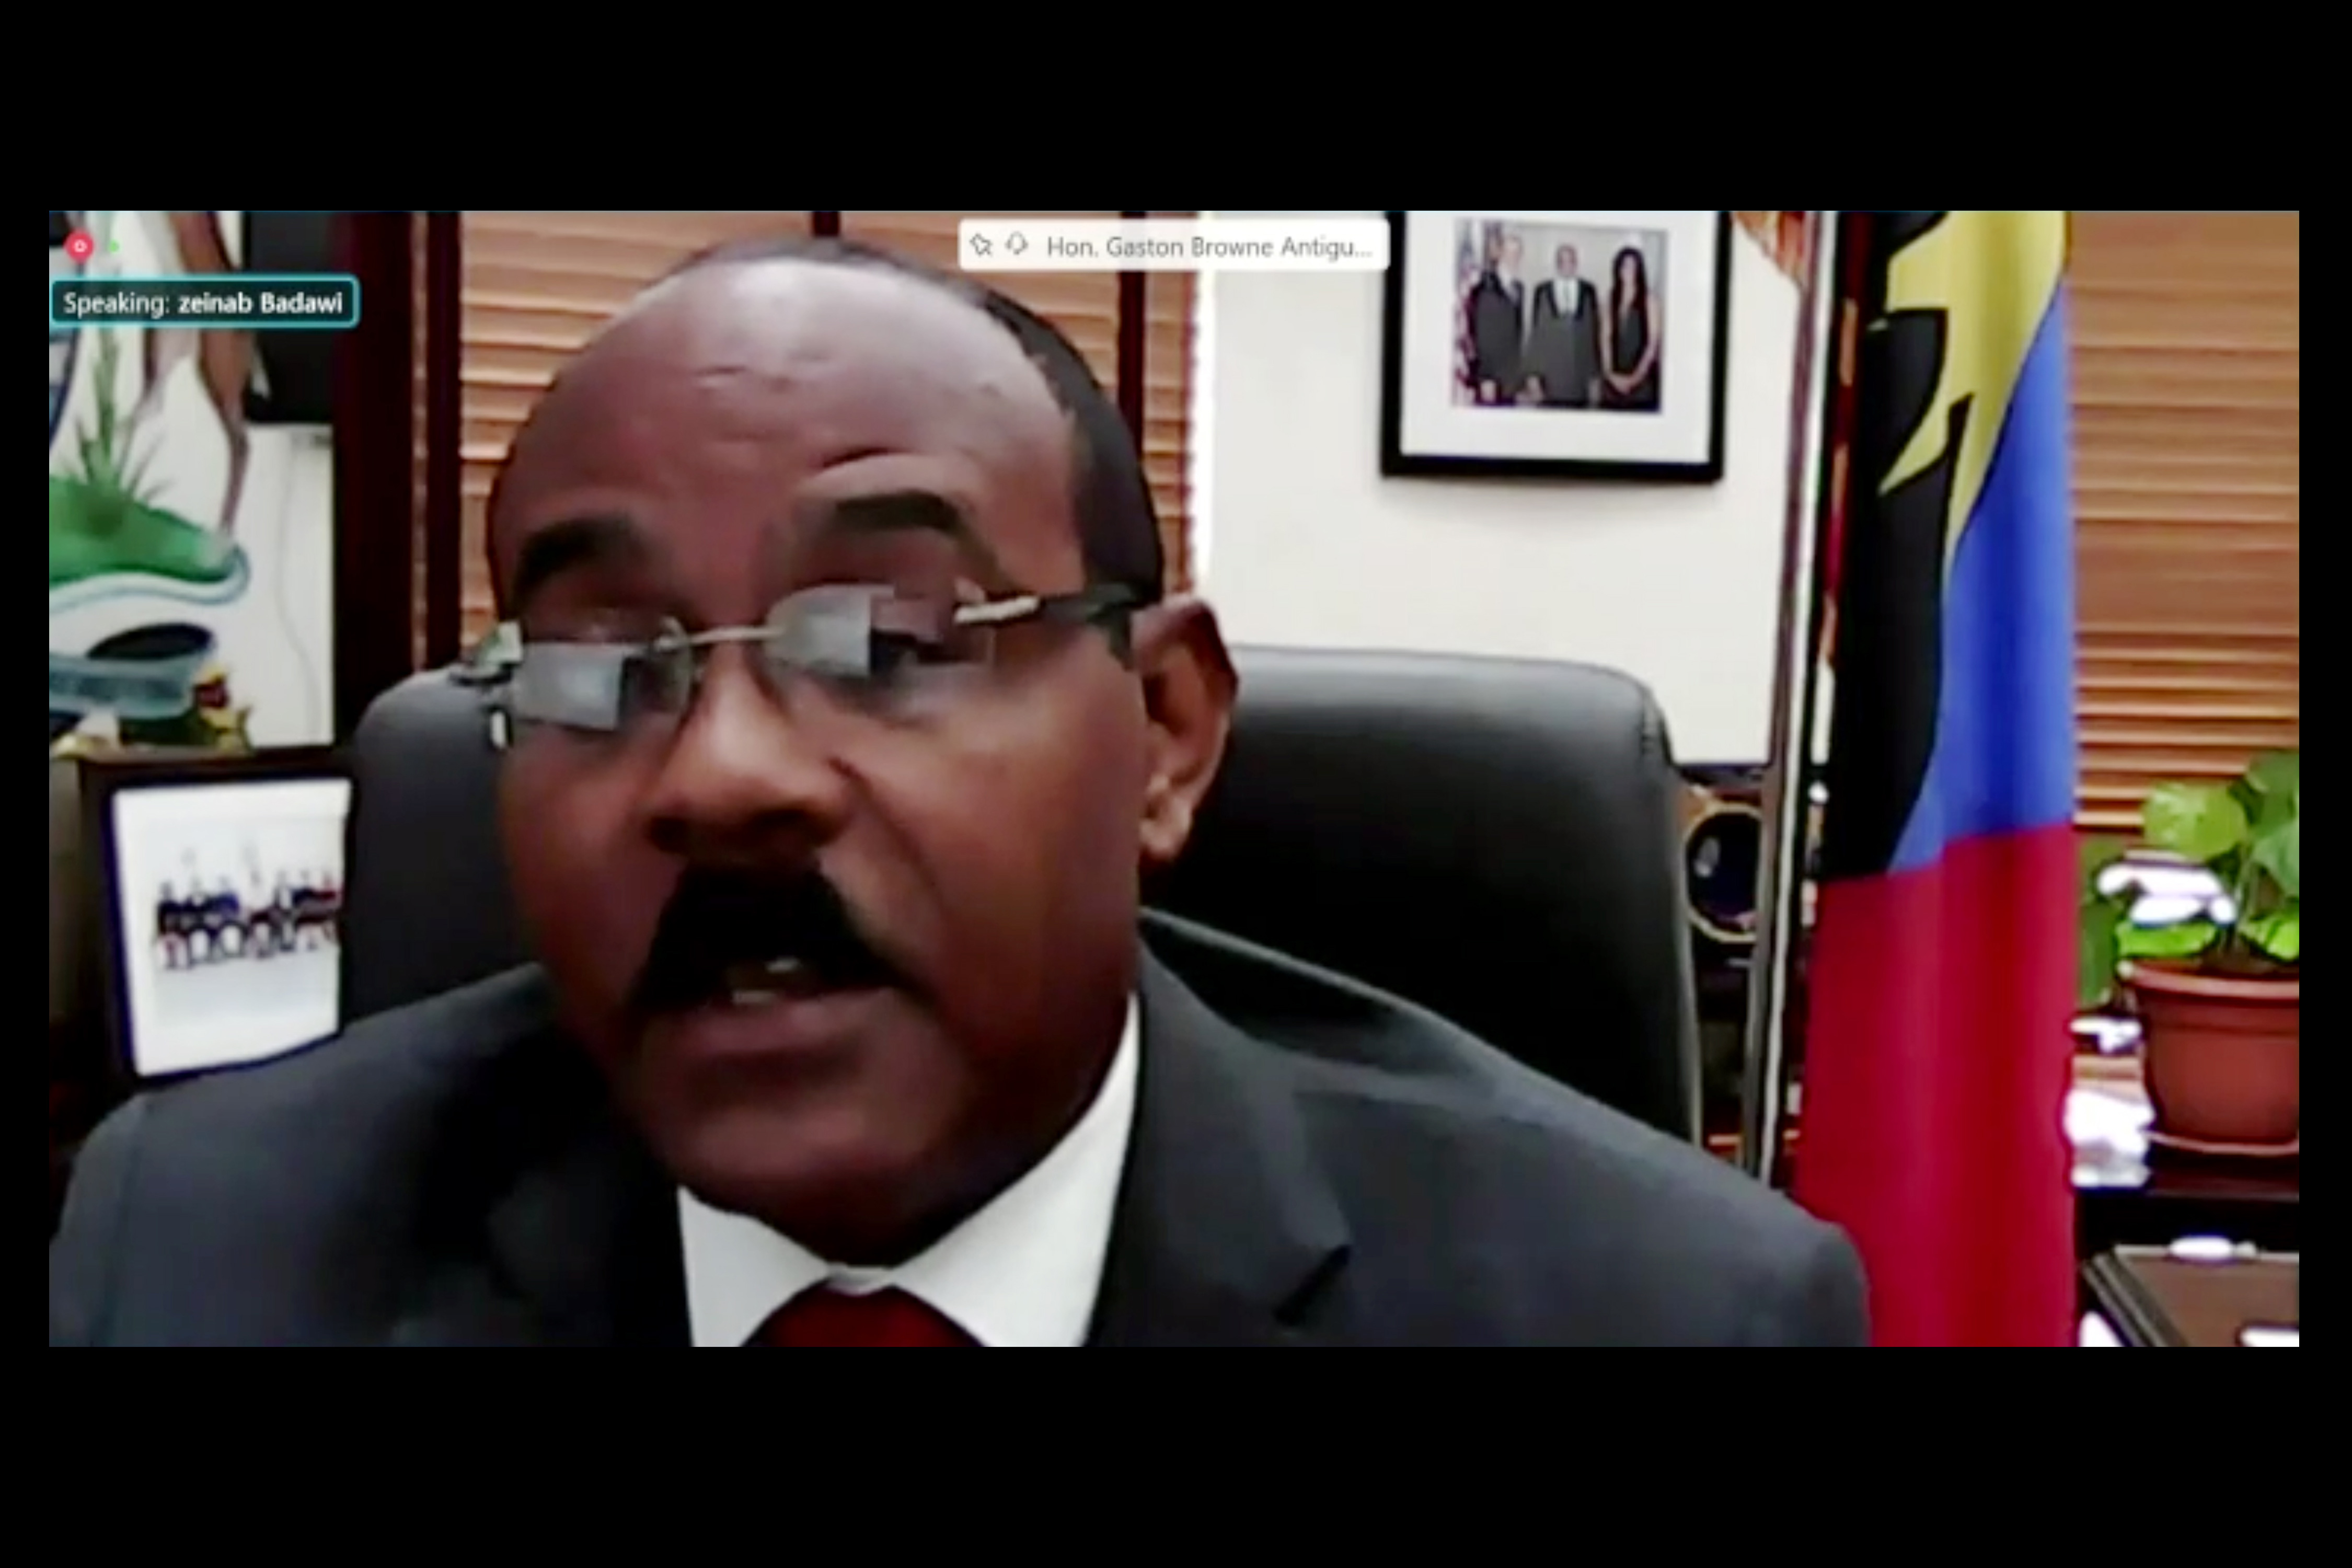 Gaston Browne, Prime Minister of Antigua and Barbuda, for the Alliance of Small Island States